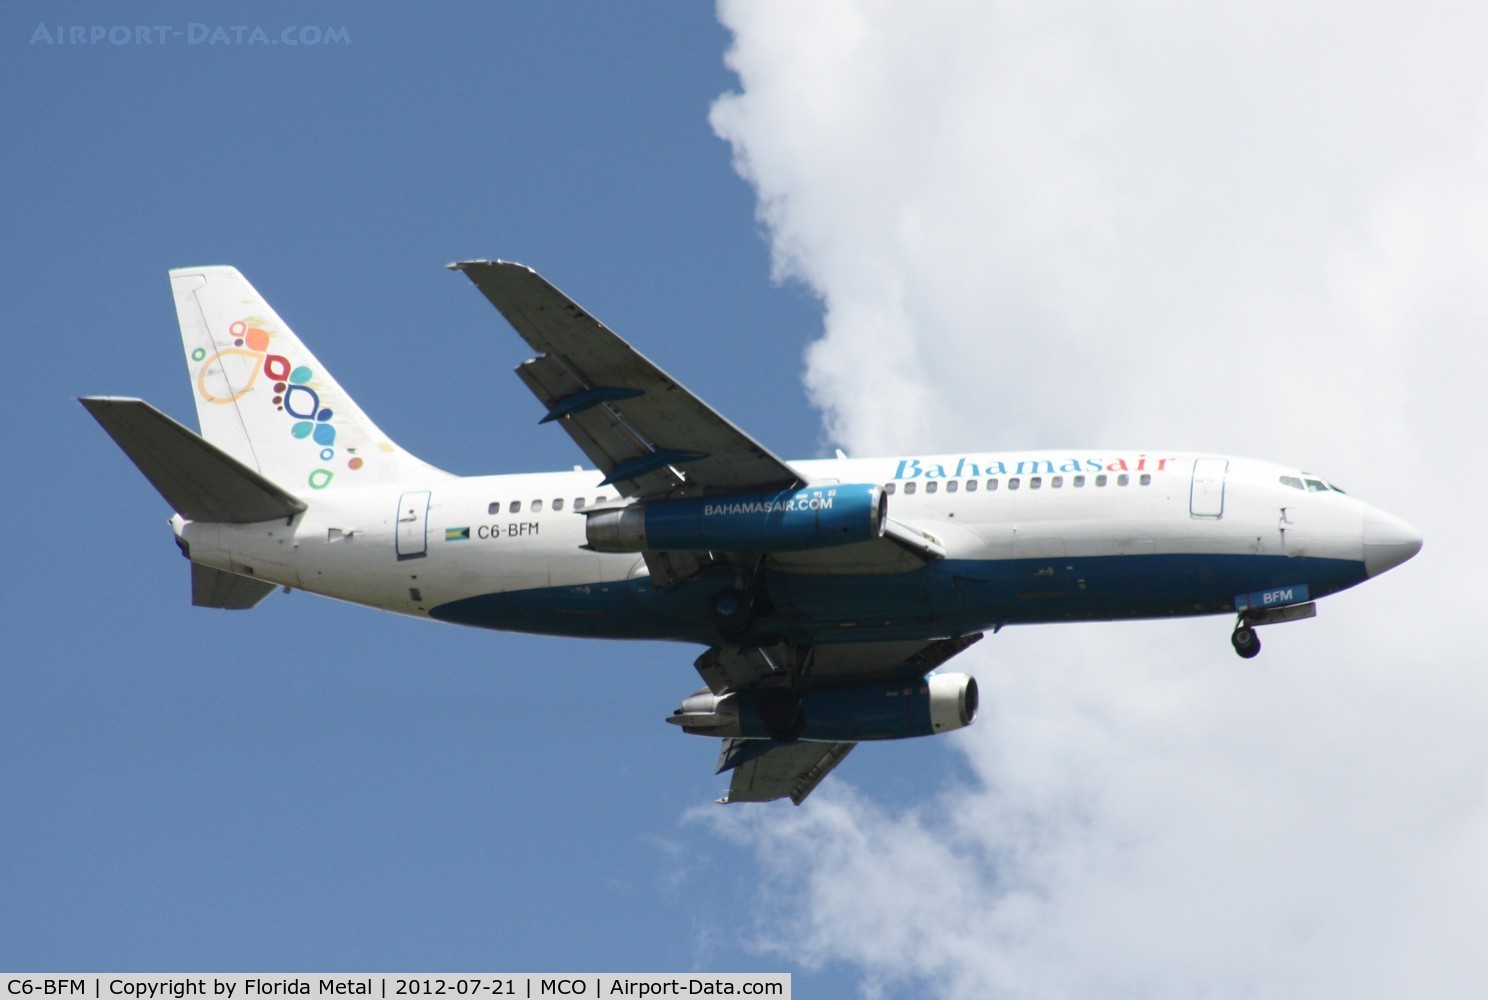 C6-BFM, 1981 Boeing 737-2K5 C/N 22596, Sadly the Bahamas Air 737-200s have been retired.